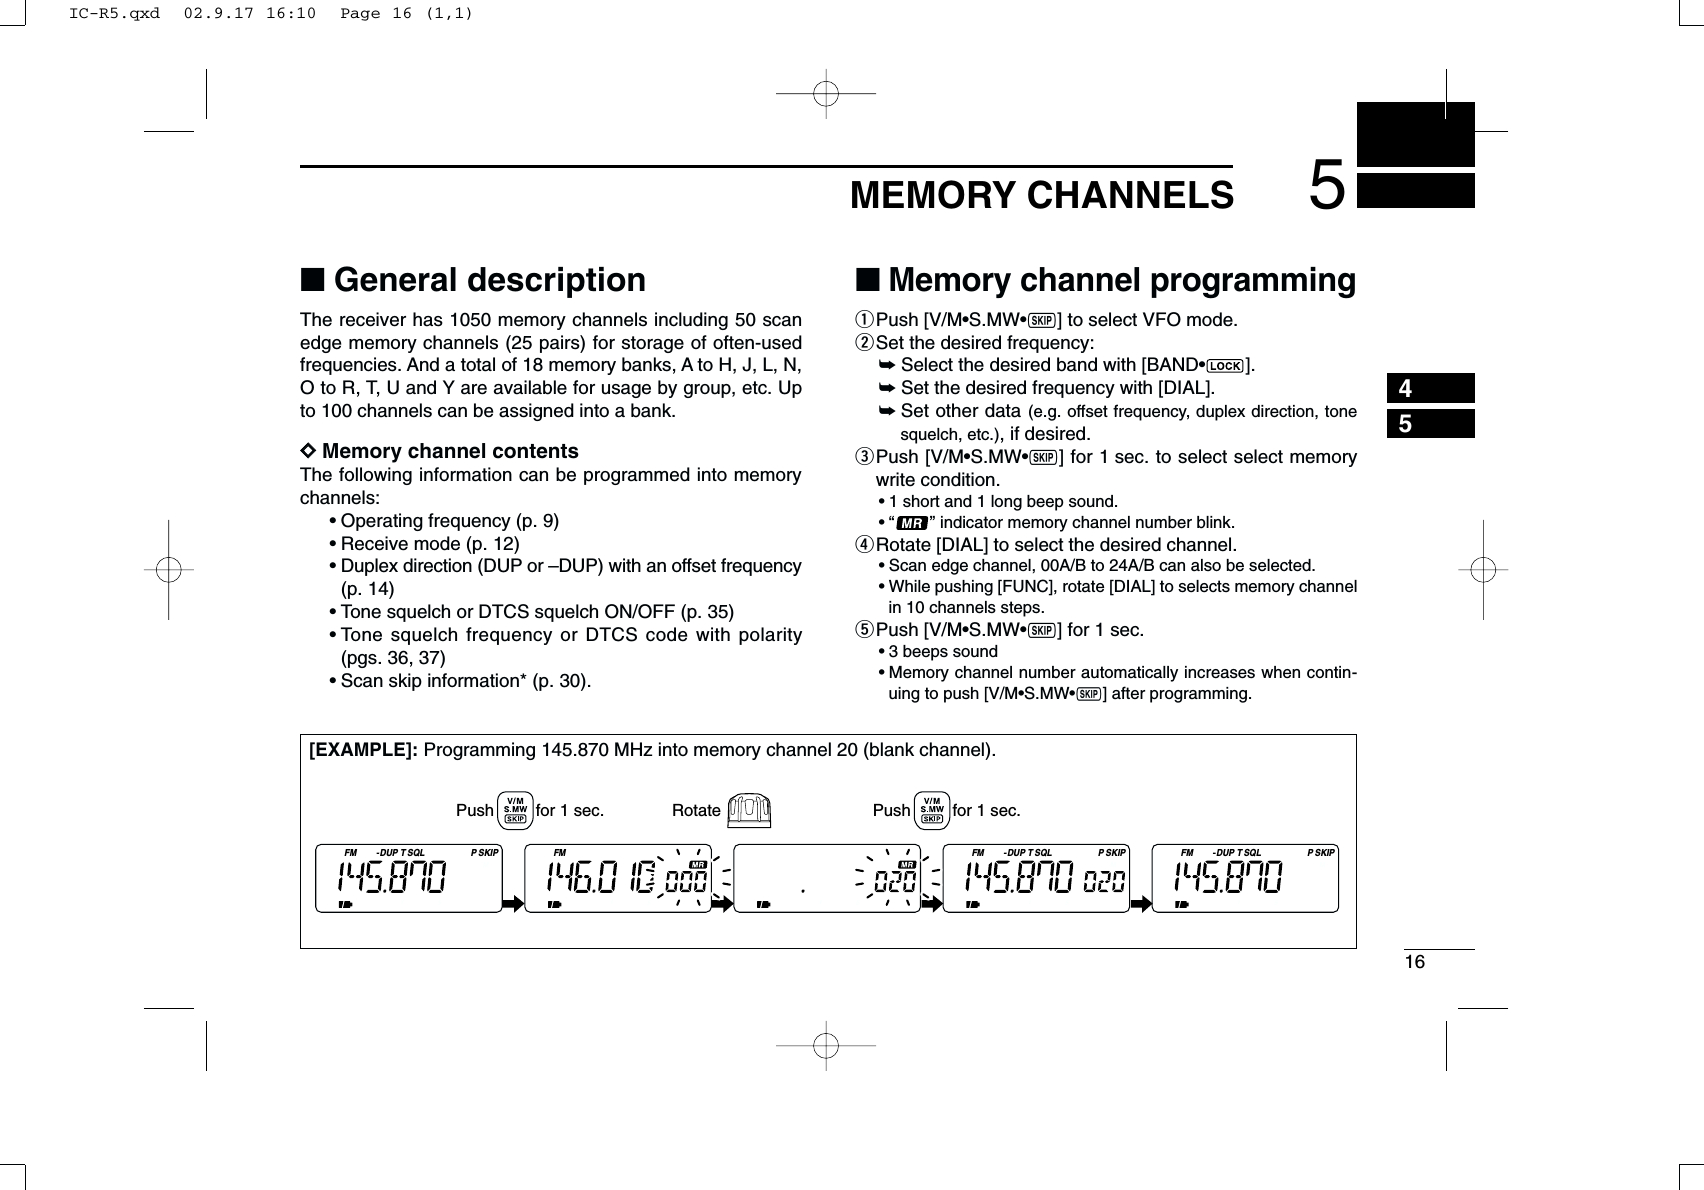 165MEMORY CHANNELS45■General descriptionThe receiver has 1050 memory channels including 50 scanedge memory channels (25 pairs) for storage of often-usedfrequencies. And a total of 18 memory banks, A to H, J, L, N,O to R, T, U and Y are available for usage by group, etc. Upto 100 channels can be assigned into a bank.DDMemory channel contentsThe following information can be programmed into memorychannels:•Operating frequency (p. 9)•Receive mode (p. 12)•Duplex direction (DUP or –DUP) with an offset frequency(p. 14)•Tone squelch or DTCS squelch ON/OFF (p. 35)•Tone squelch frequency or DTCS code with polarity(pgs. 36, 37)•Scan skip information* (p. 30). ■Memory channel programmingqPush [V/M•S.MW•~] to select VFO mode.wSet the desired frequency:➥Select the desired band with [BAND•].➥Set the desired frequency with [DIAL].➥Set other data (e.g. offset frequency, duplex direction, tonesquelch, etc.), if desired.ePush [V/M•S.MW•~] for 1 sec. to select select memorywrite condition.•1 short and 1 long beep sound.•“ ” indicator memory channel number blink.rRotate [DIAL] to select the desired channel.•Scan edge channel, 00A/B to 24A/B can also be selected.•While pushing [FUNC], rotate [DIAL] to selects memory channelin 10 channels steps.tPush [V/M•S.MW•~] for 1 sec.•3 beeps sound•Memory channel number automatically increases when contin-uing to push [V/M•S.MW•~] after programming.[EXAMPLE]: Programming 145.870 MHz into memory channel 20 (blank channel).FM DUP SQL SKIPTP FM FM DUP SQL SKIPTPFM DUP SQL SKIPTPPush         for 1 sec. Push         for 1 sec.RotateIC-R5.qxd  02.9.17 16:10  Page 16 (1,1)